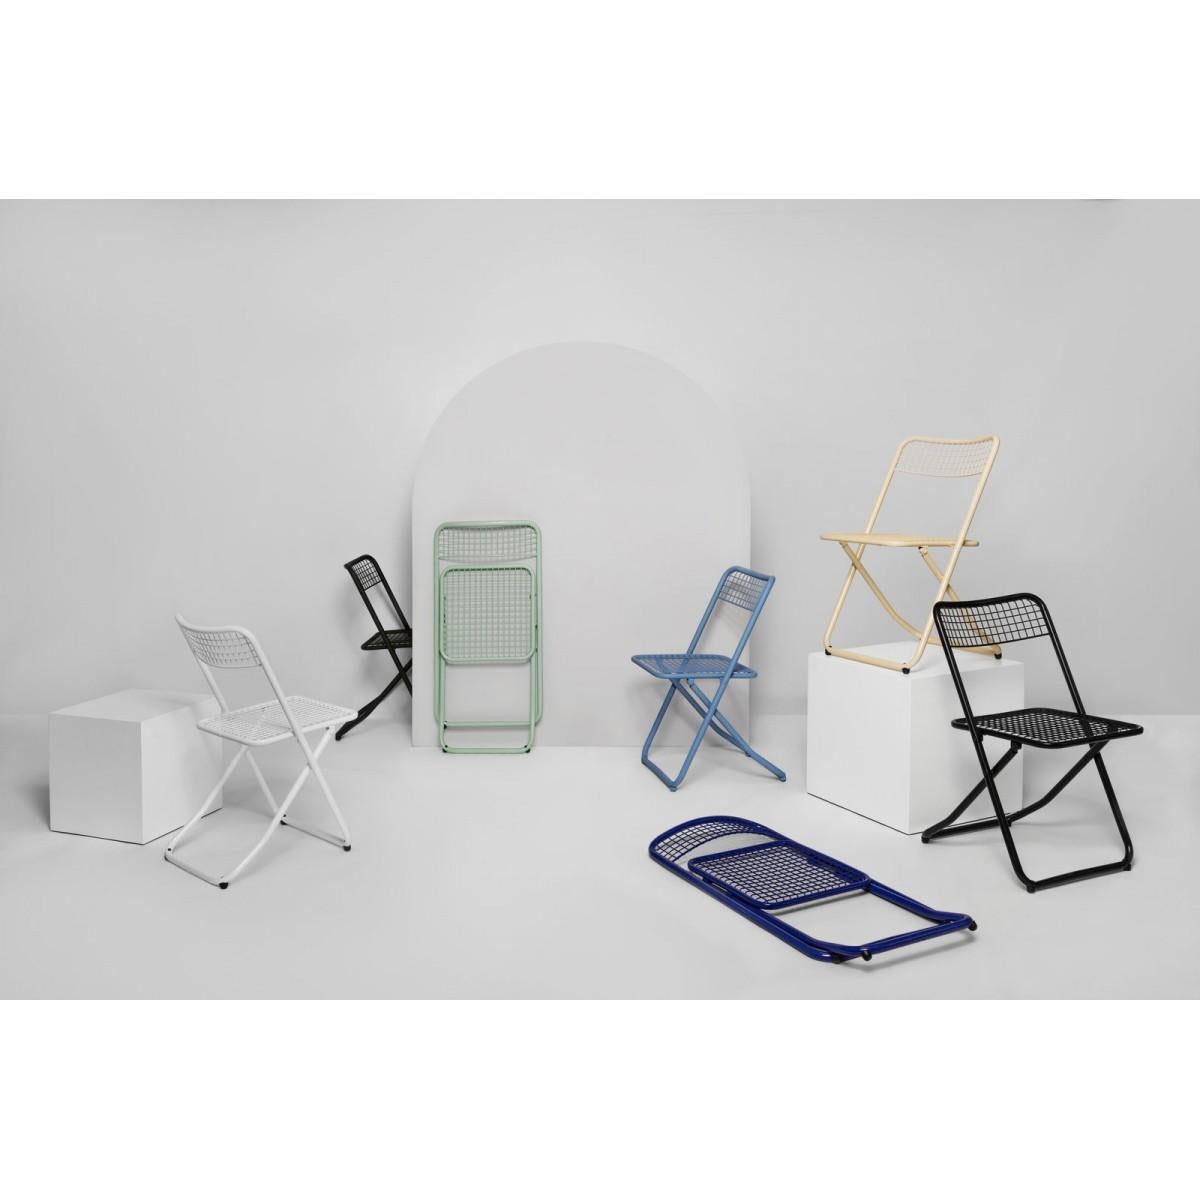 New Folding Iron Chair Blue 5002 by Houtique  2